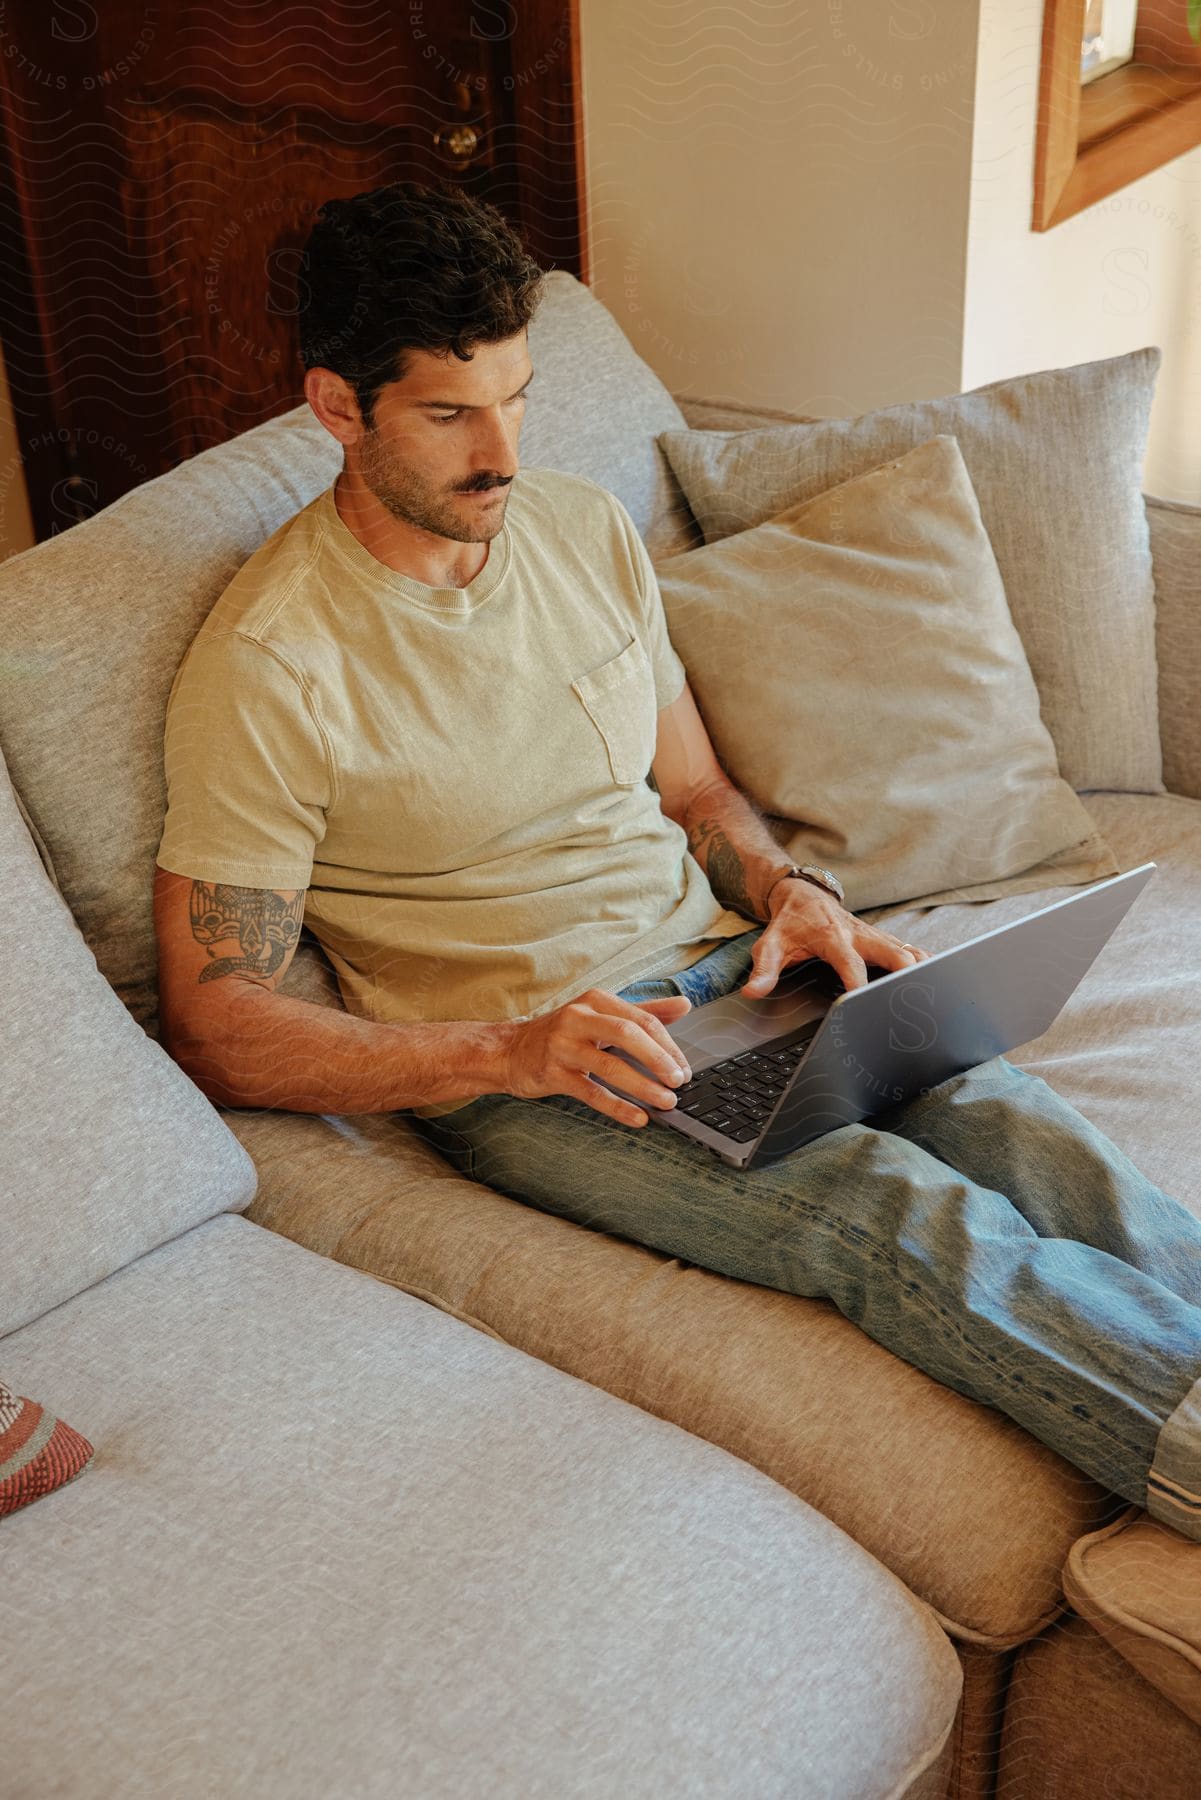 Man sitting on the sofa with legs extended, working on a laptop.